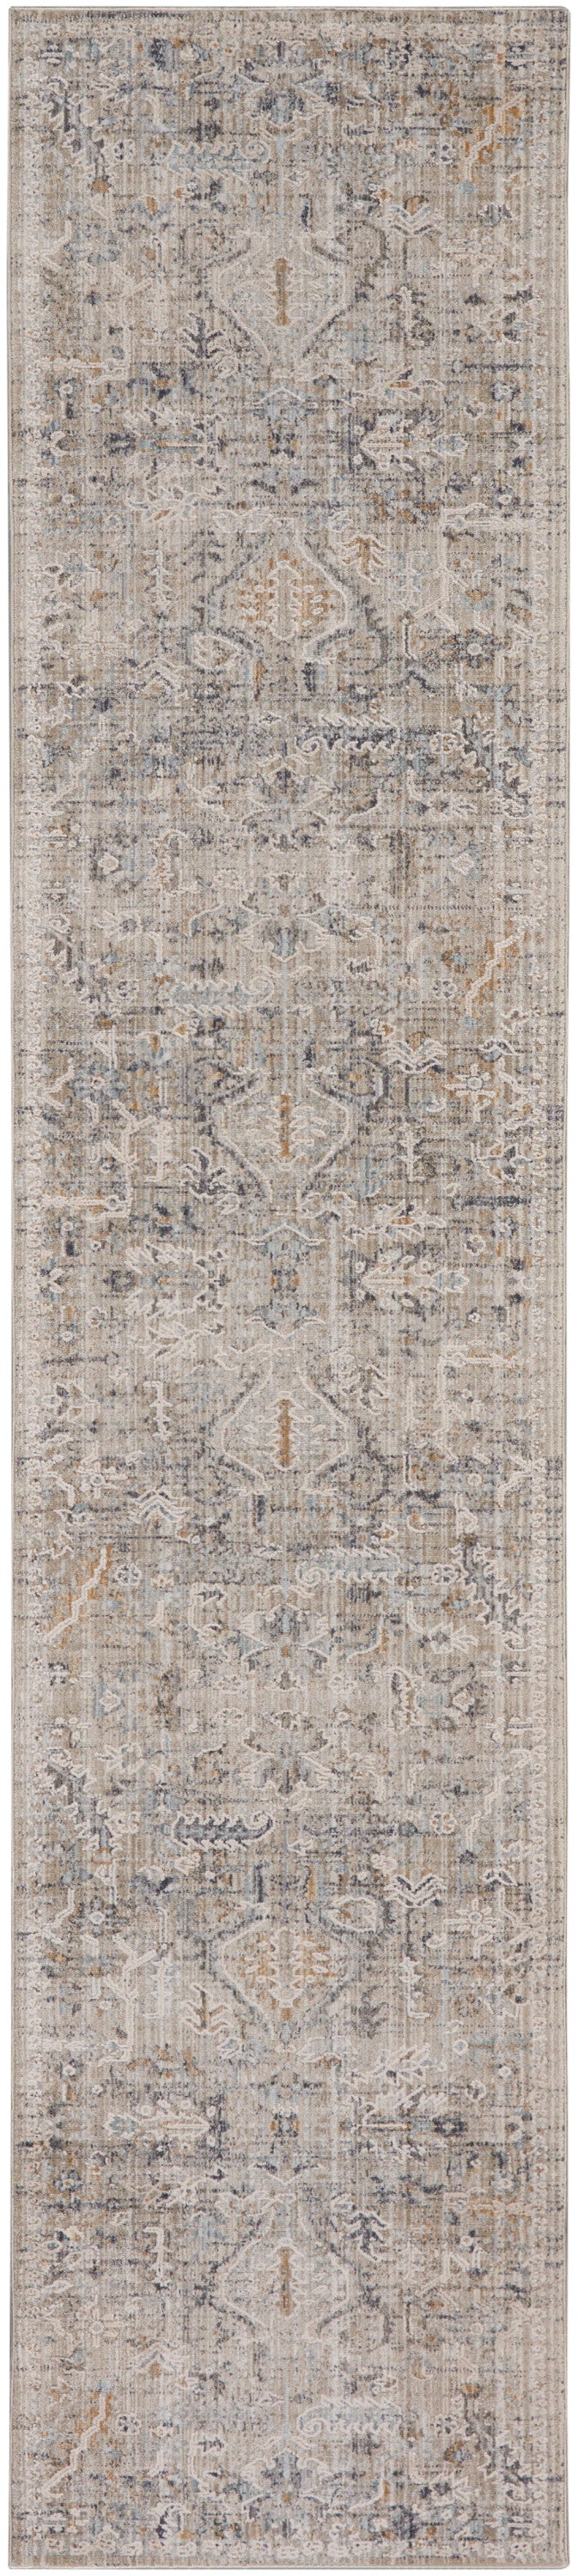 lynx ivory taupe rug by nourison 99446083227 redo 29